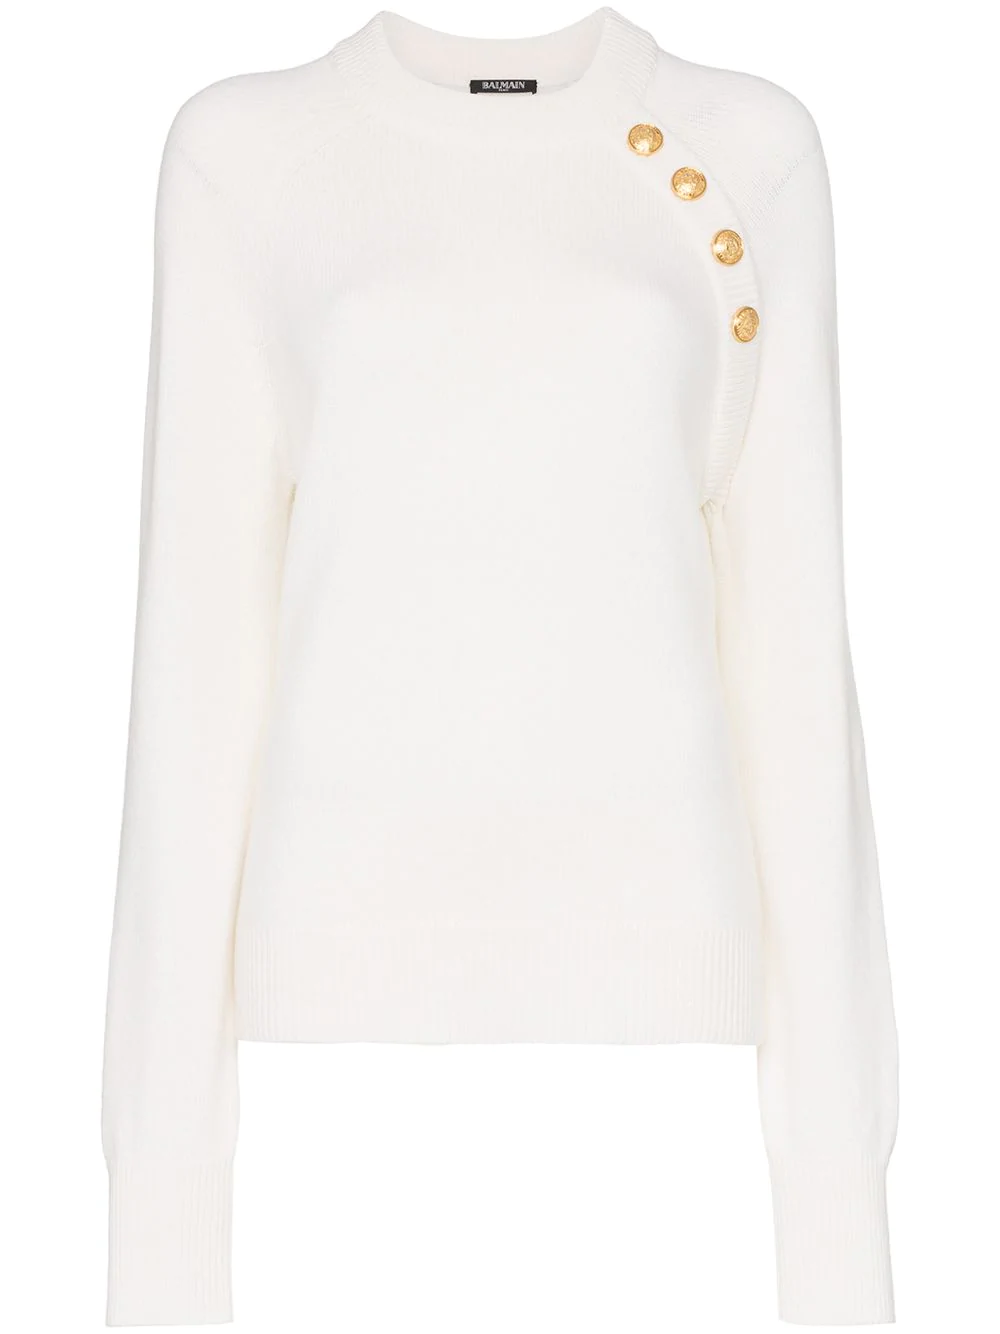 Balmain Long-Sleeved Knitted Cashmere Gold Button Sweater - White ...